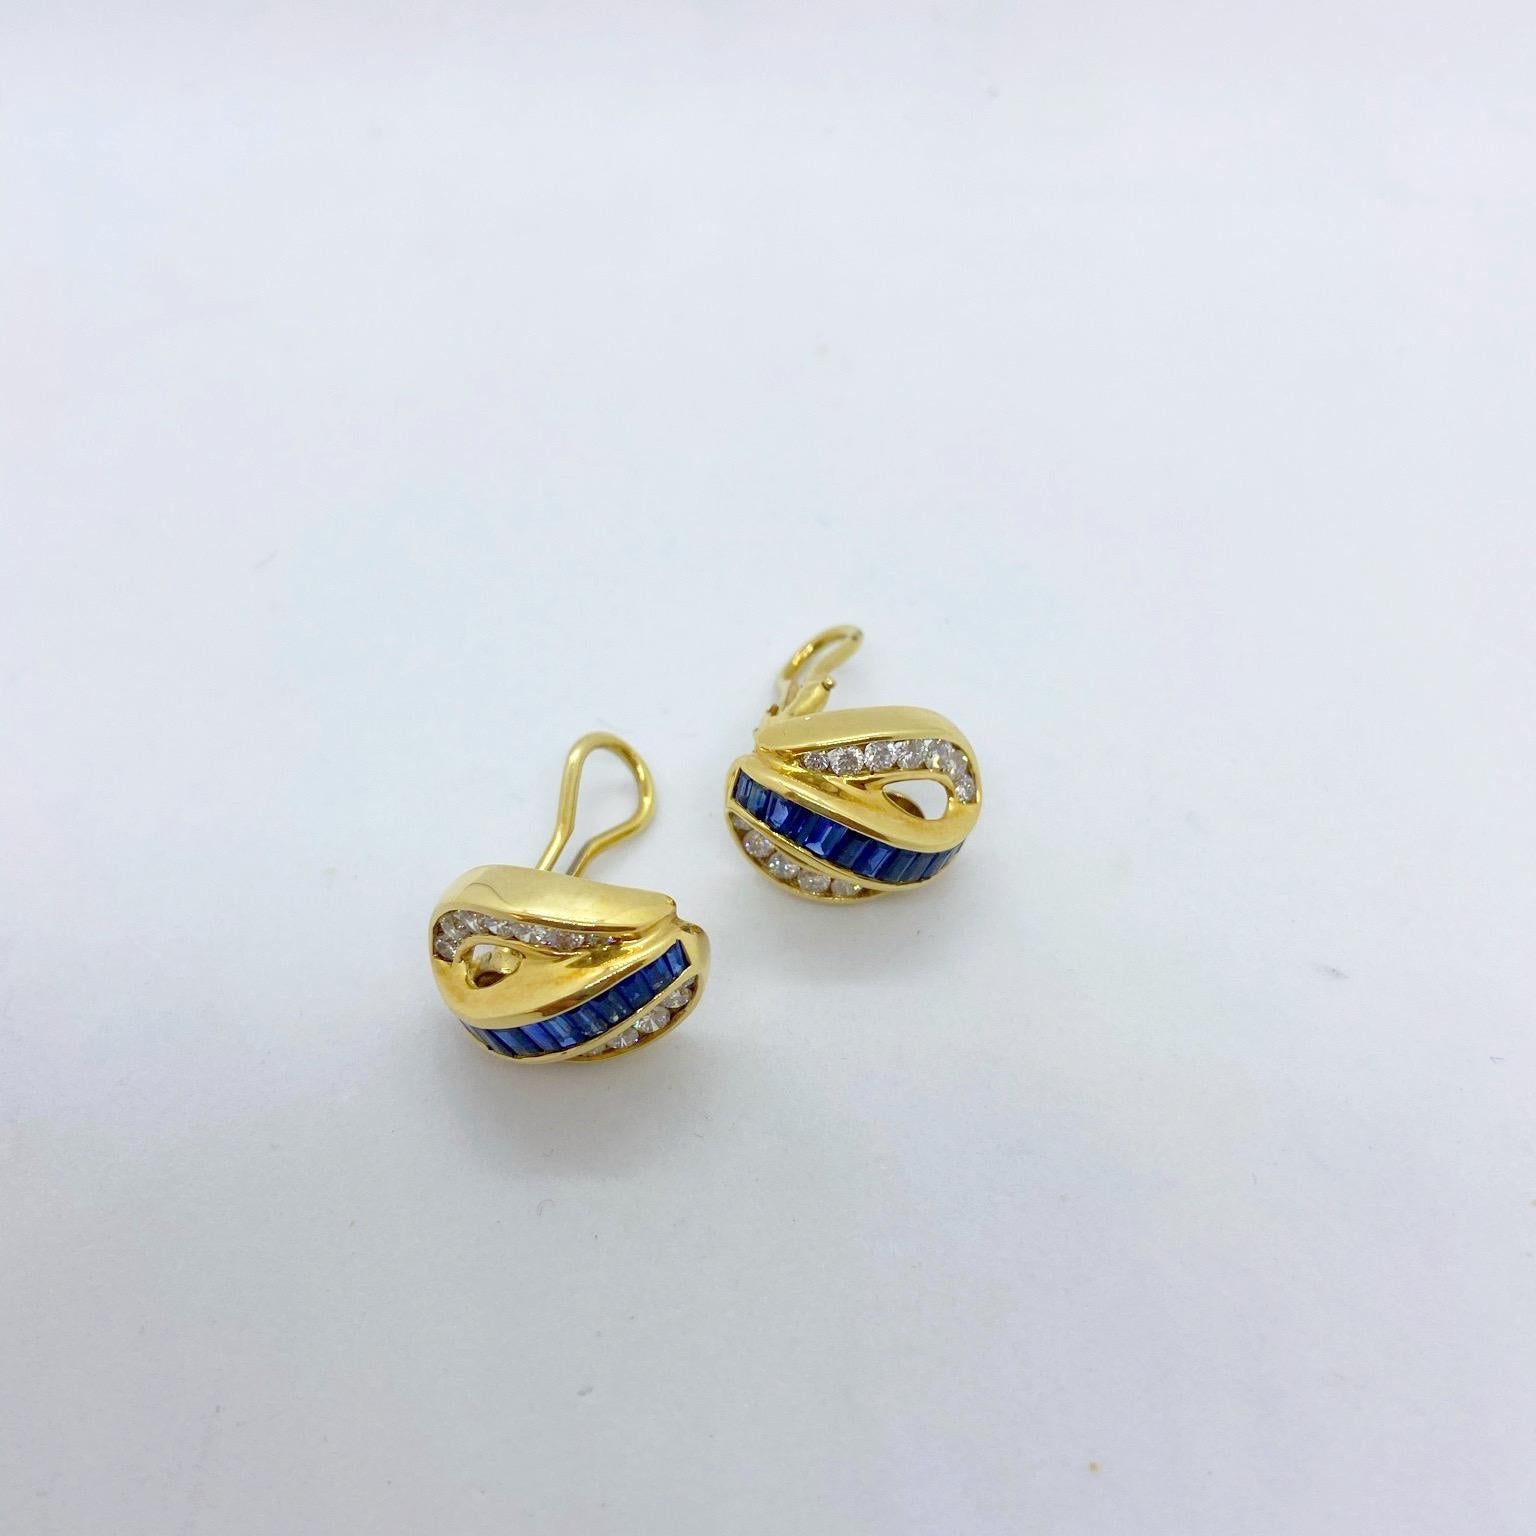 Charles Krypell 18KT Yellow Gold 2.30 Carat Sapphire and 1.16ct Diamond Earrings For Sale 2